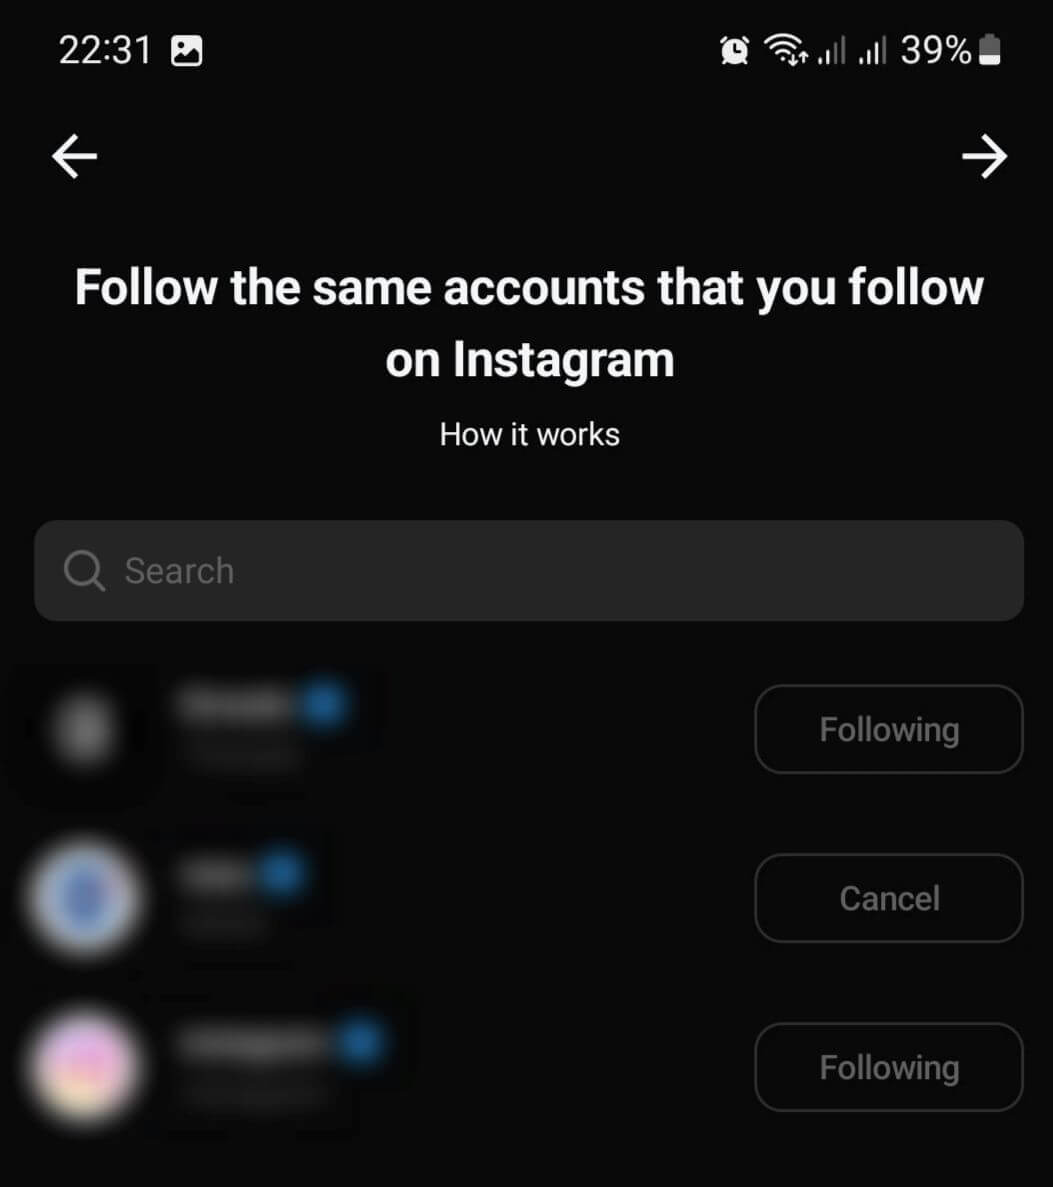  choose to follow the same accounts you follow on Instagram